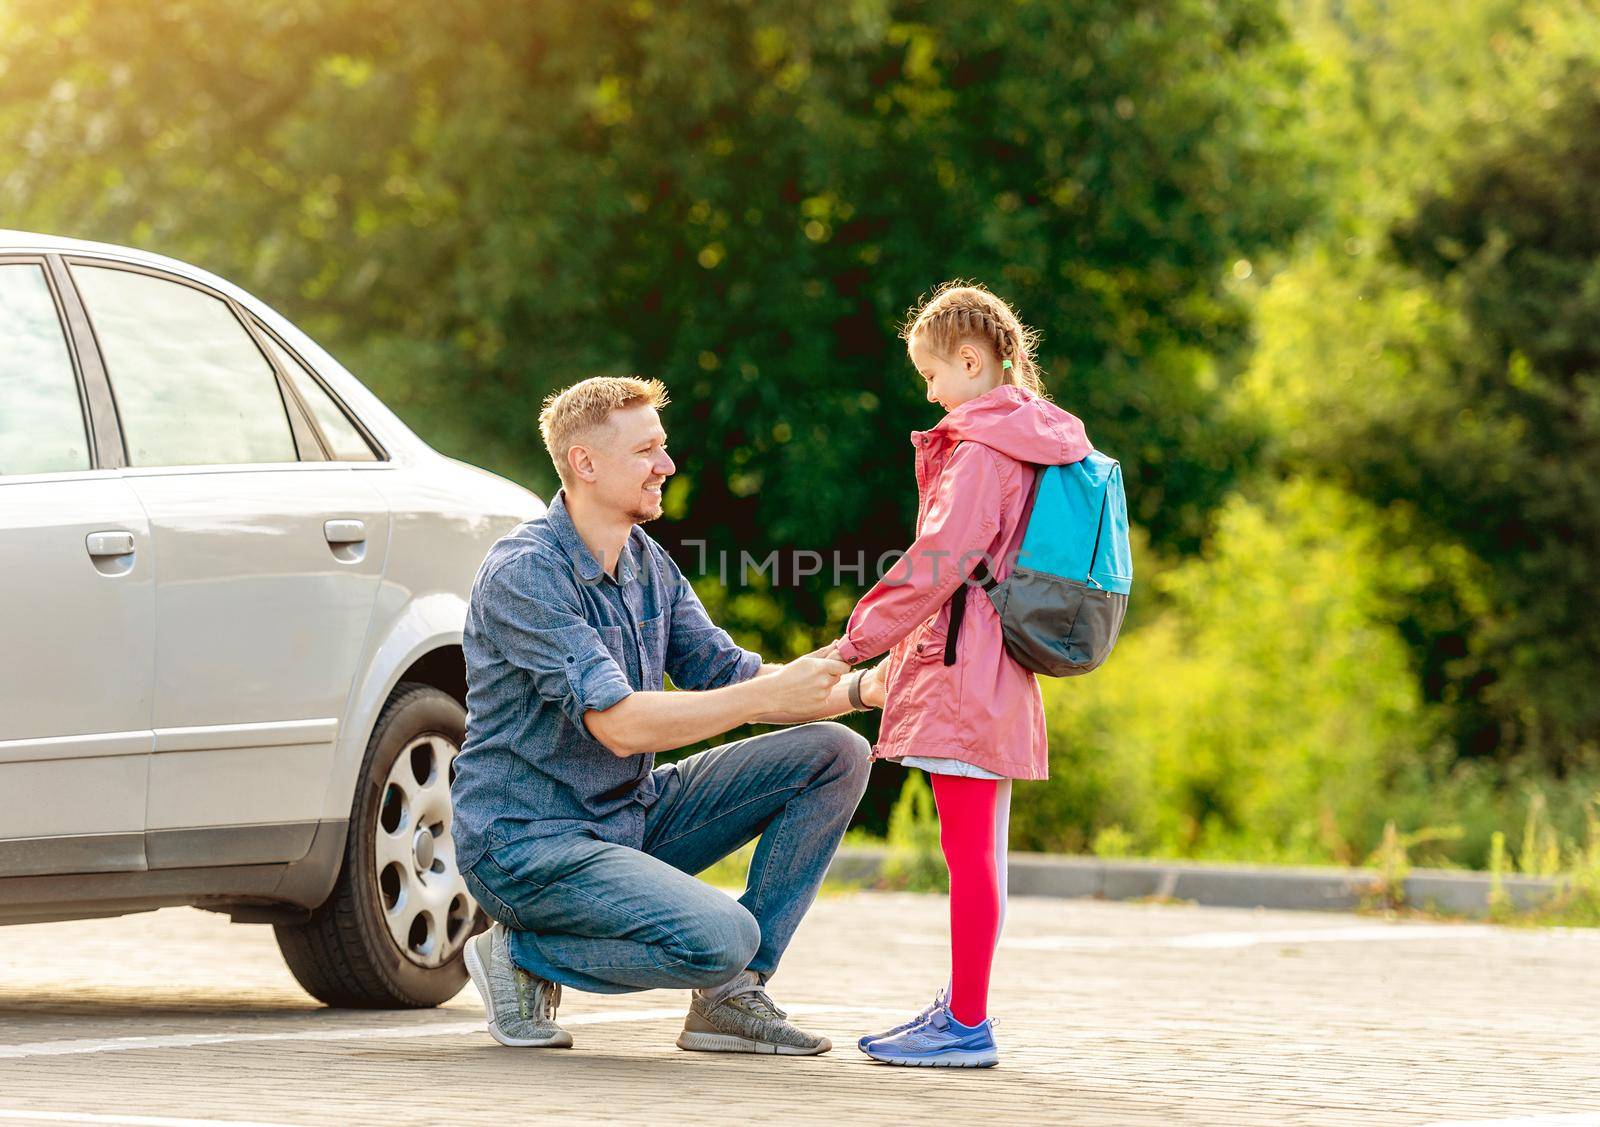 Father meeting little girl after classes by tan4ikk1